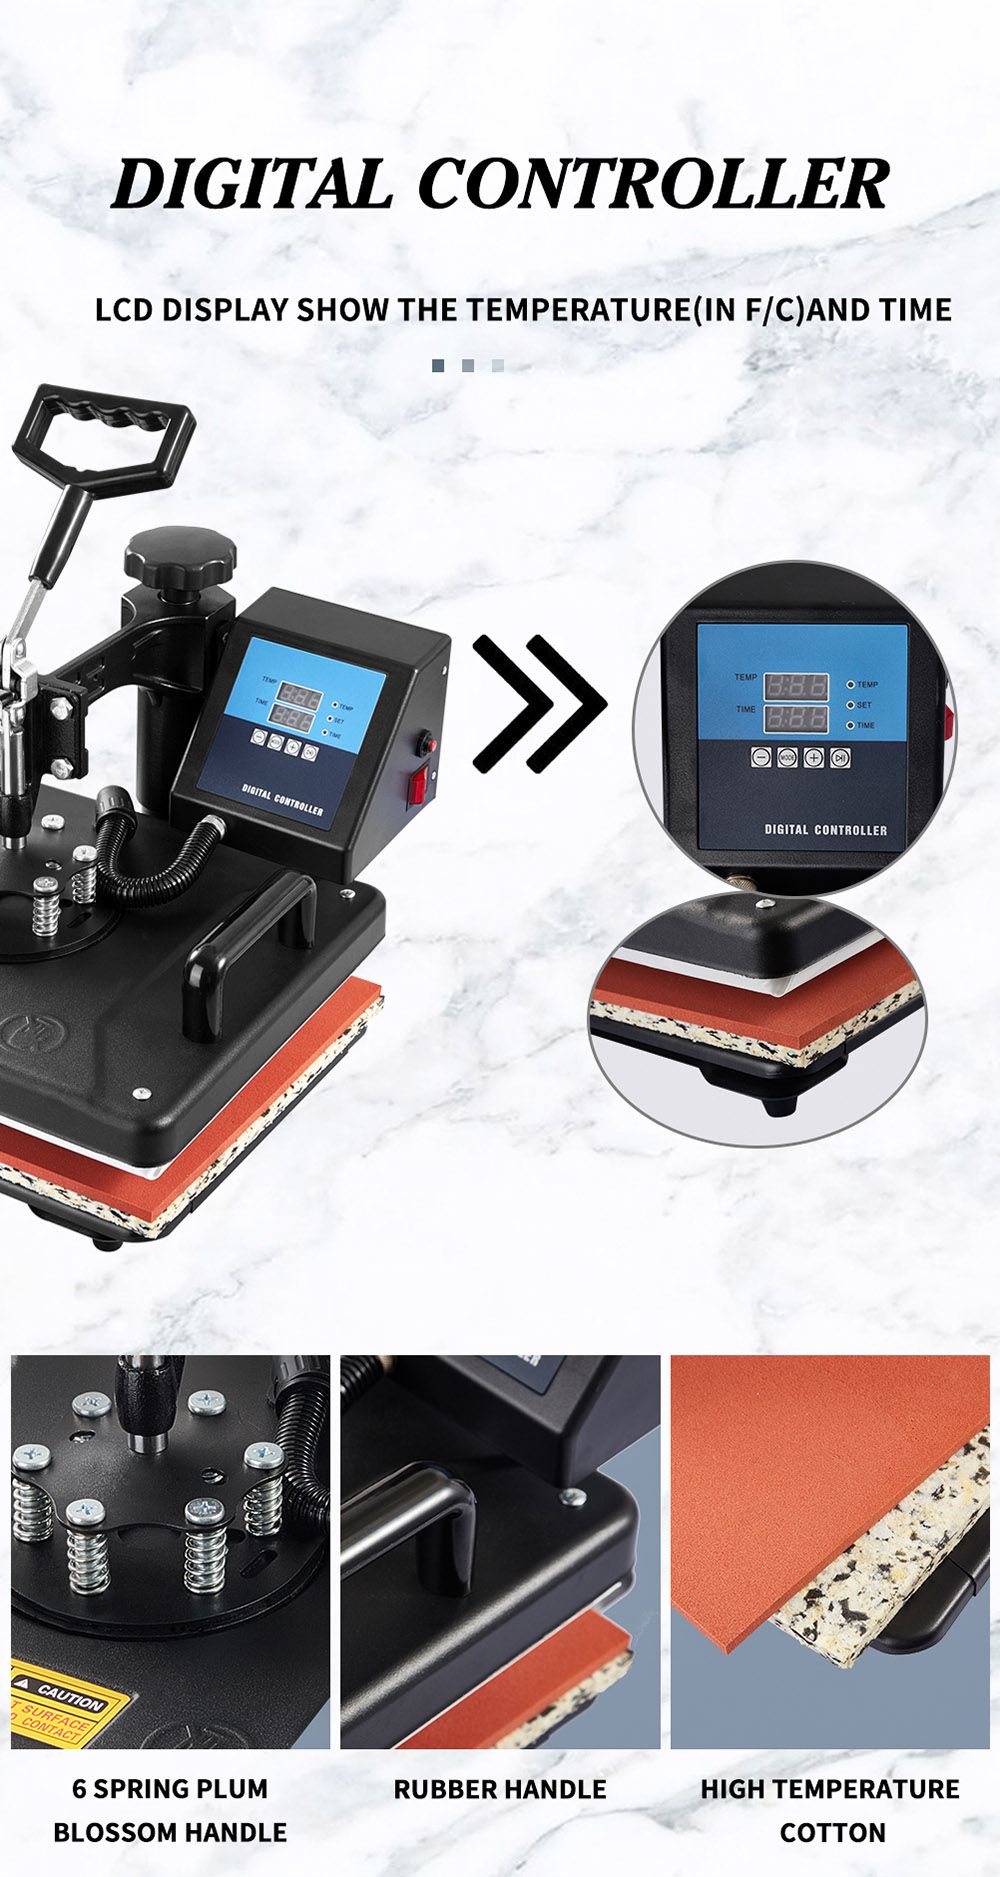 SHUOHAO 7 in 1 Heat Press Machine, 11.4*15in, for Cap/Bag/Mouse Pad/Phone Case/Tape/Stickers/Mug/Plate/Puzzle/T-shirts